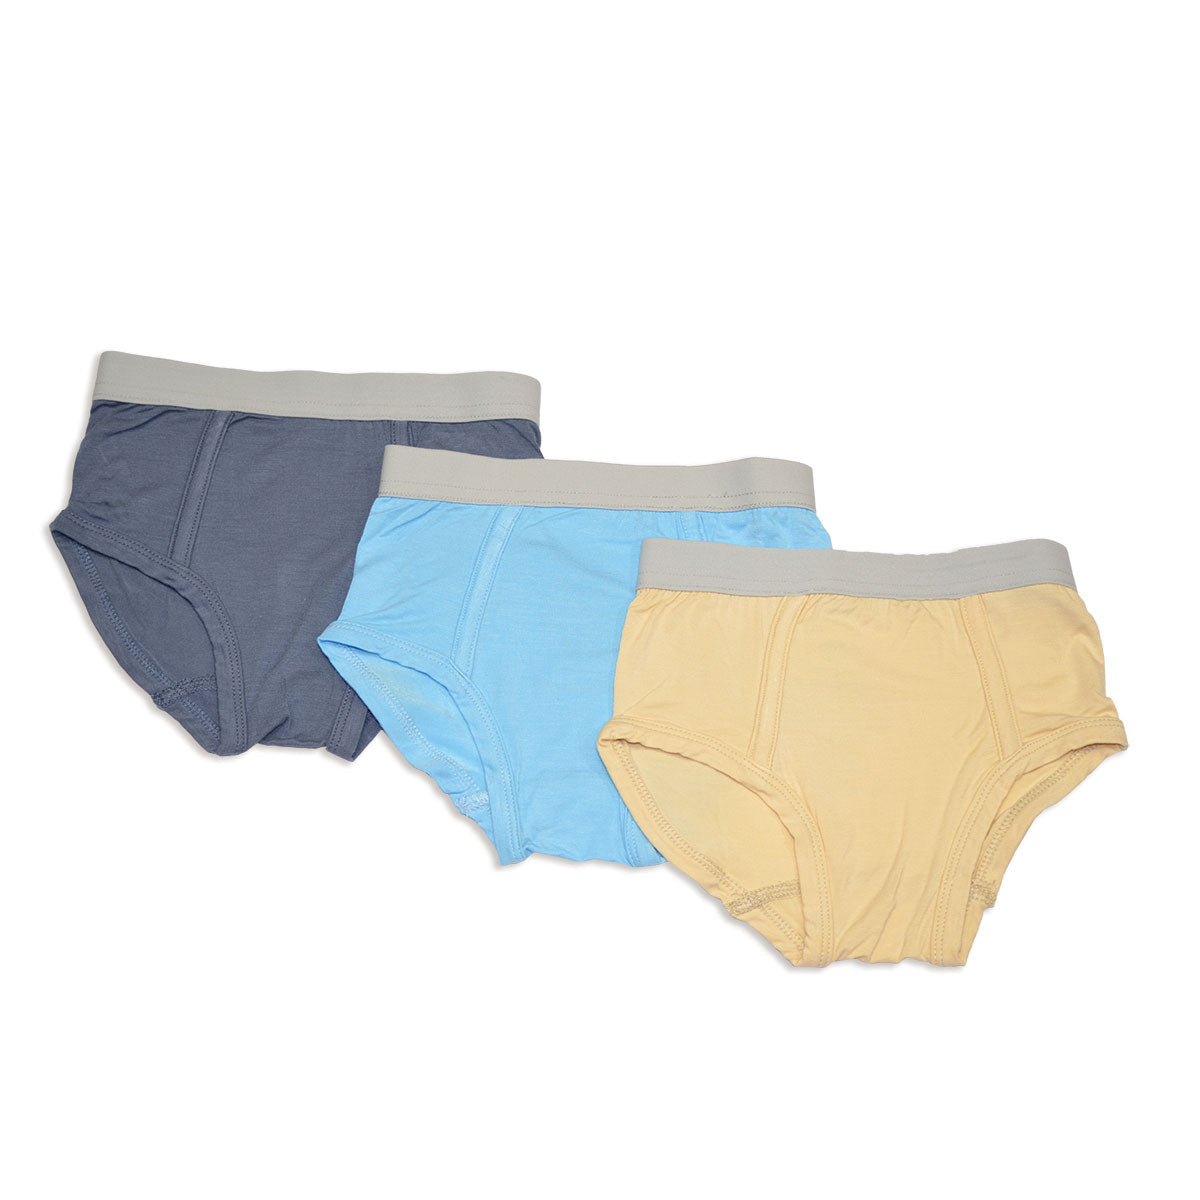 6 Pack Potty Training Pants for Boys,Max Shape Potty Training Underwear for  Boys 2T,3T,4T